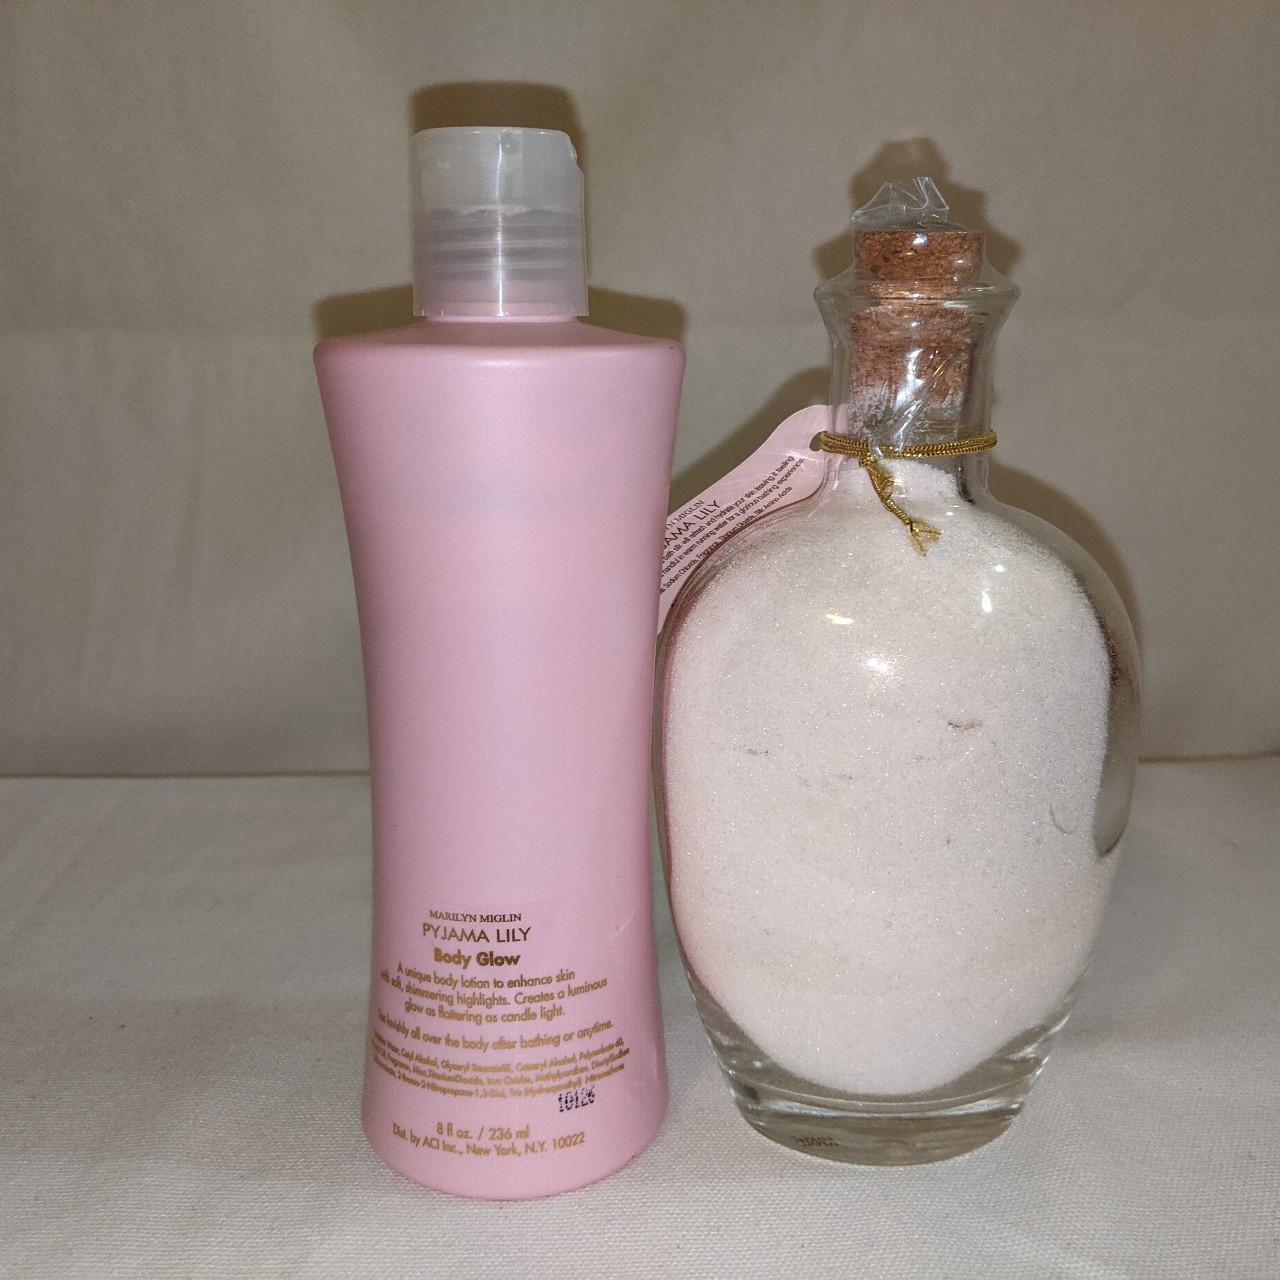 Product Image 2 - Bath & Body set by